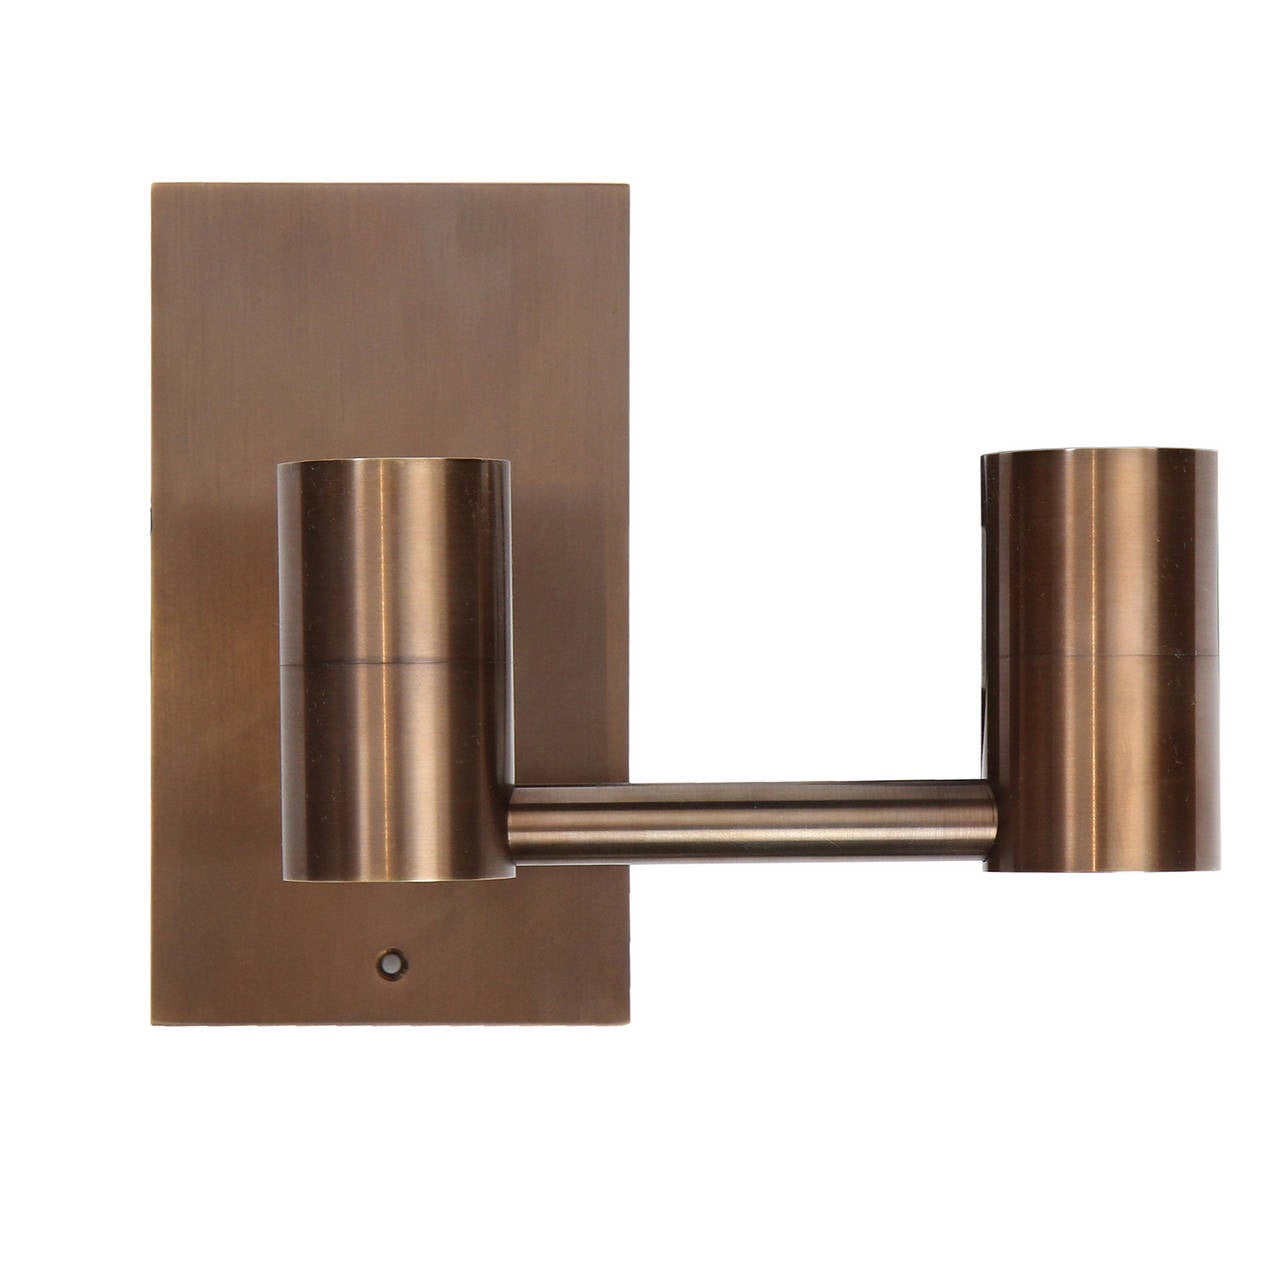 An impeccably made double arm wall sconce having a spare architectural form, crafted of solid brass. Available in polished, brushed, patinated or blackened finishes. Lead time 4-8 weeks. Made by the Wyeth Workshop in Brooklyn, NY.